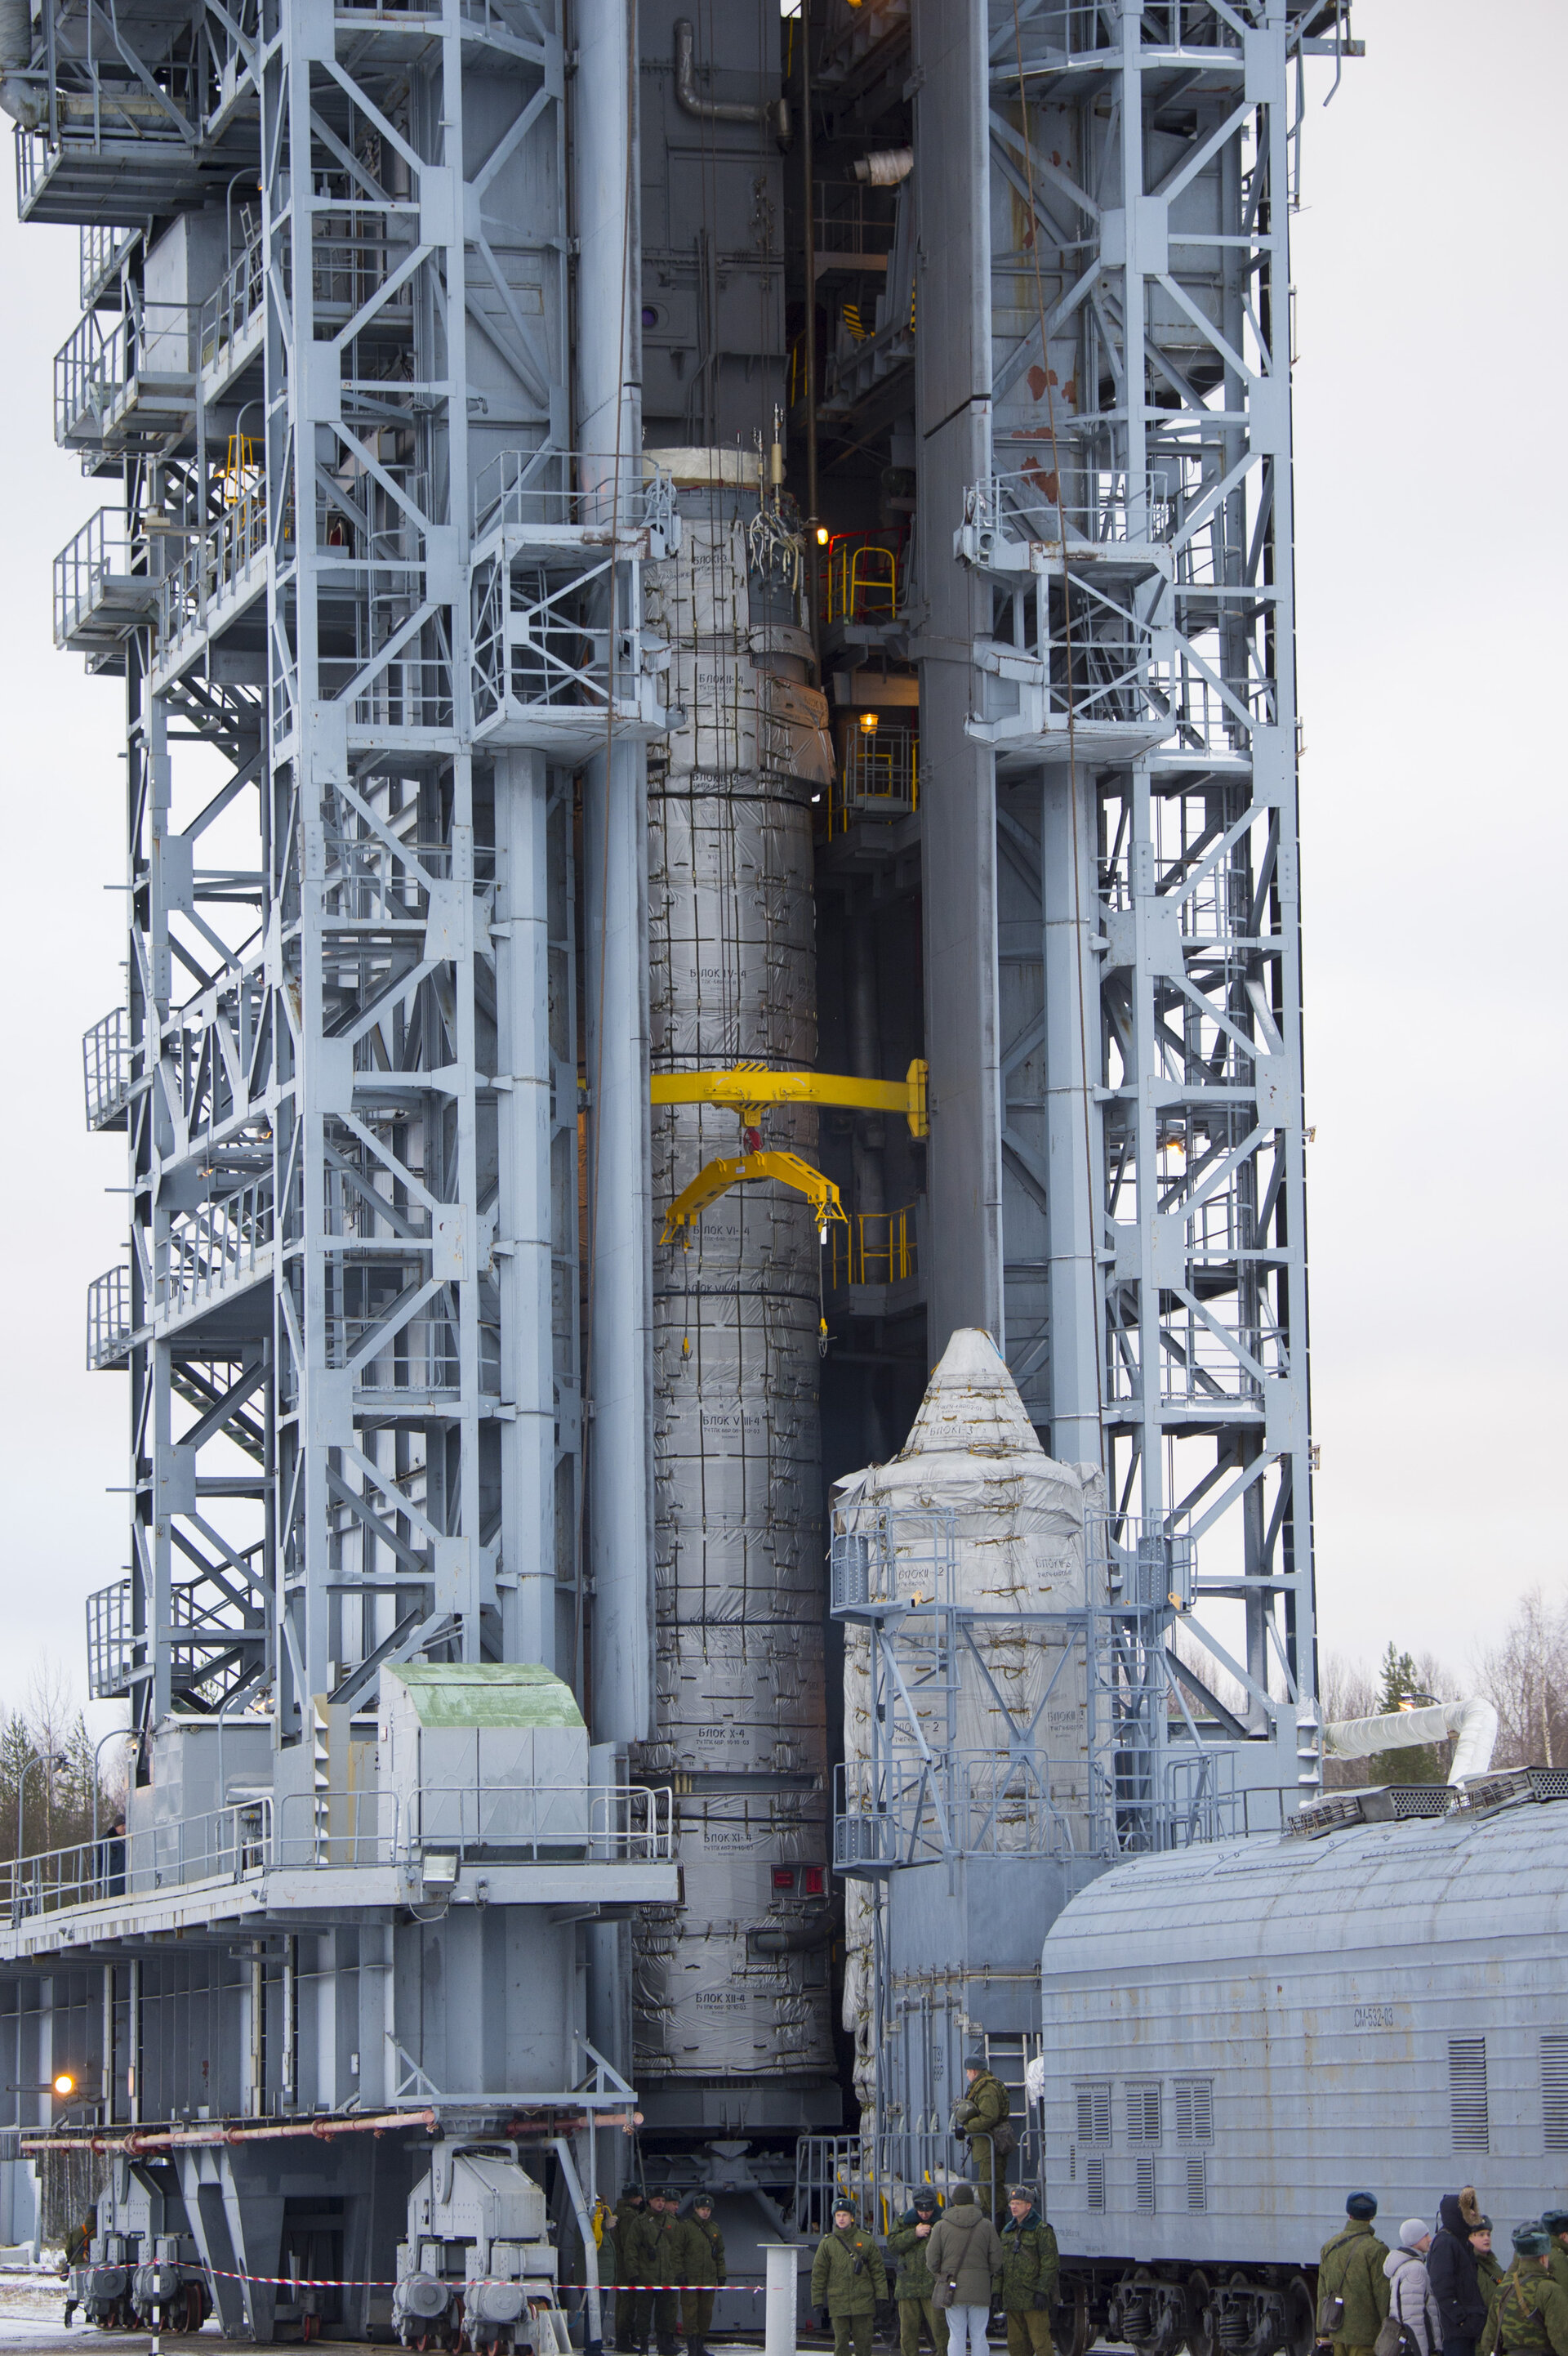 Swarm Upper Composite transferred to the launch pad 